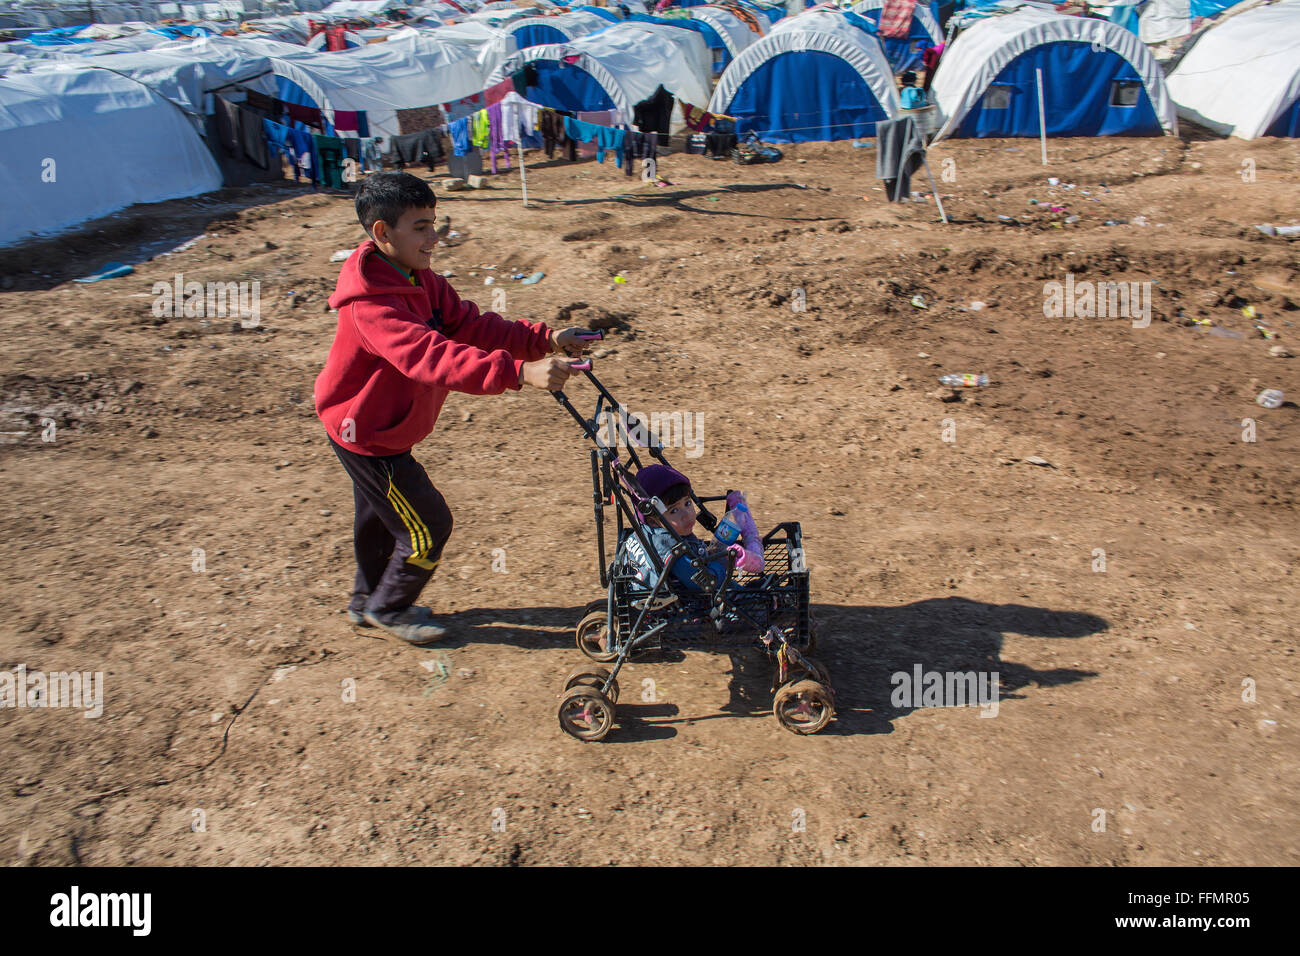 Displaced people in a refugee camp in Northern Iraq Stock Photo